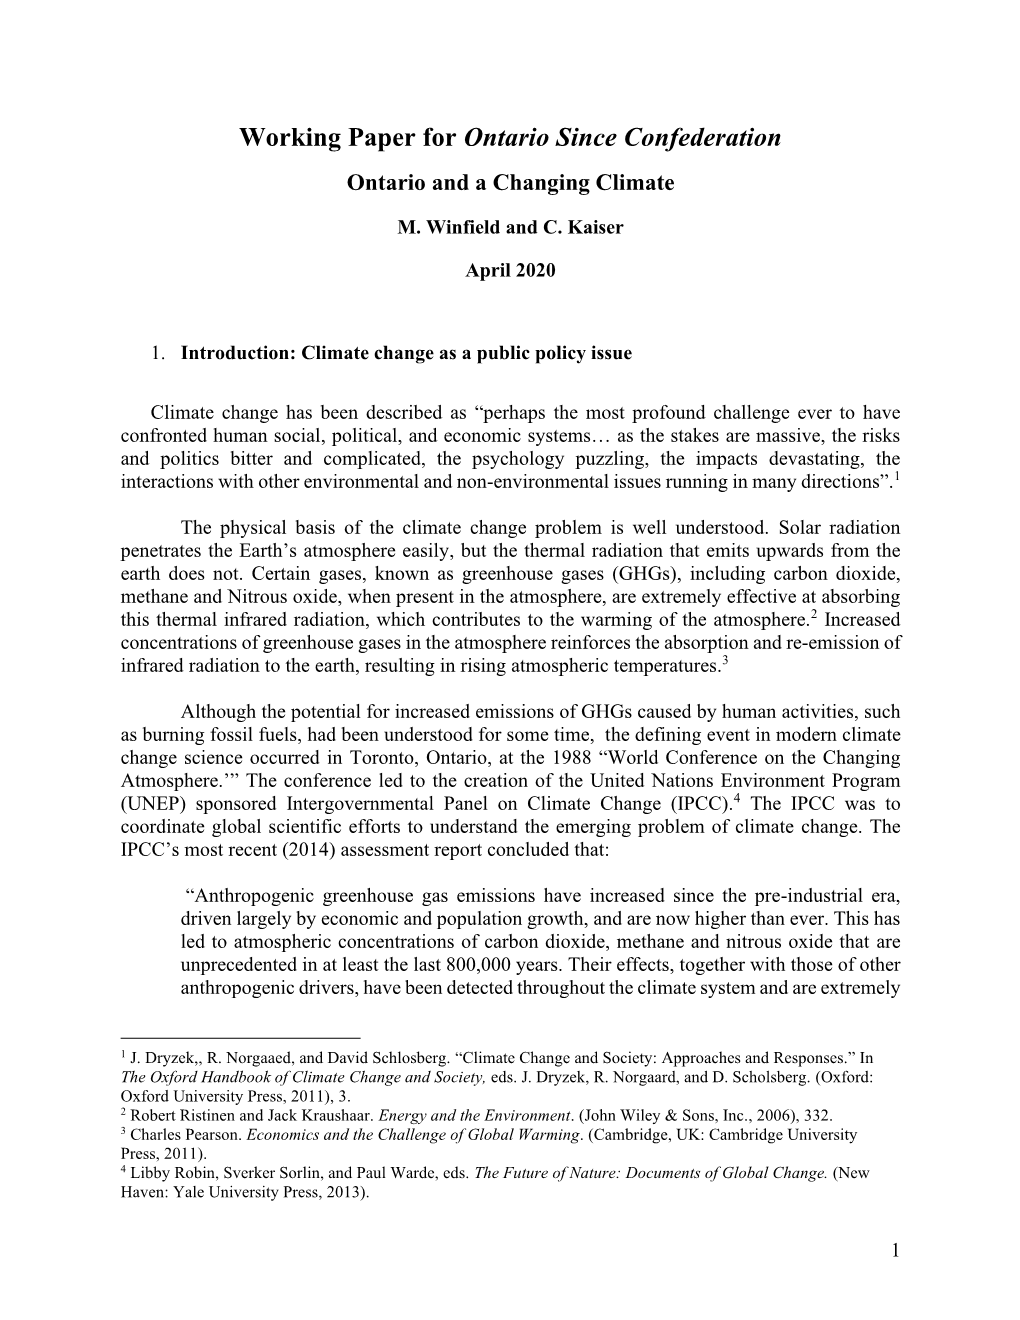 Working Paper for Ontario Since Confederation Ontario and a Changing Climate